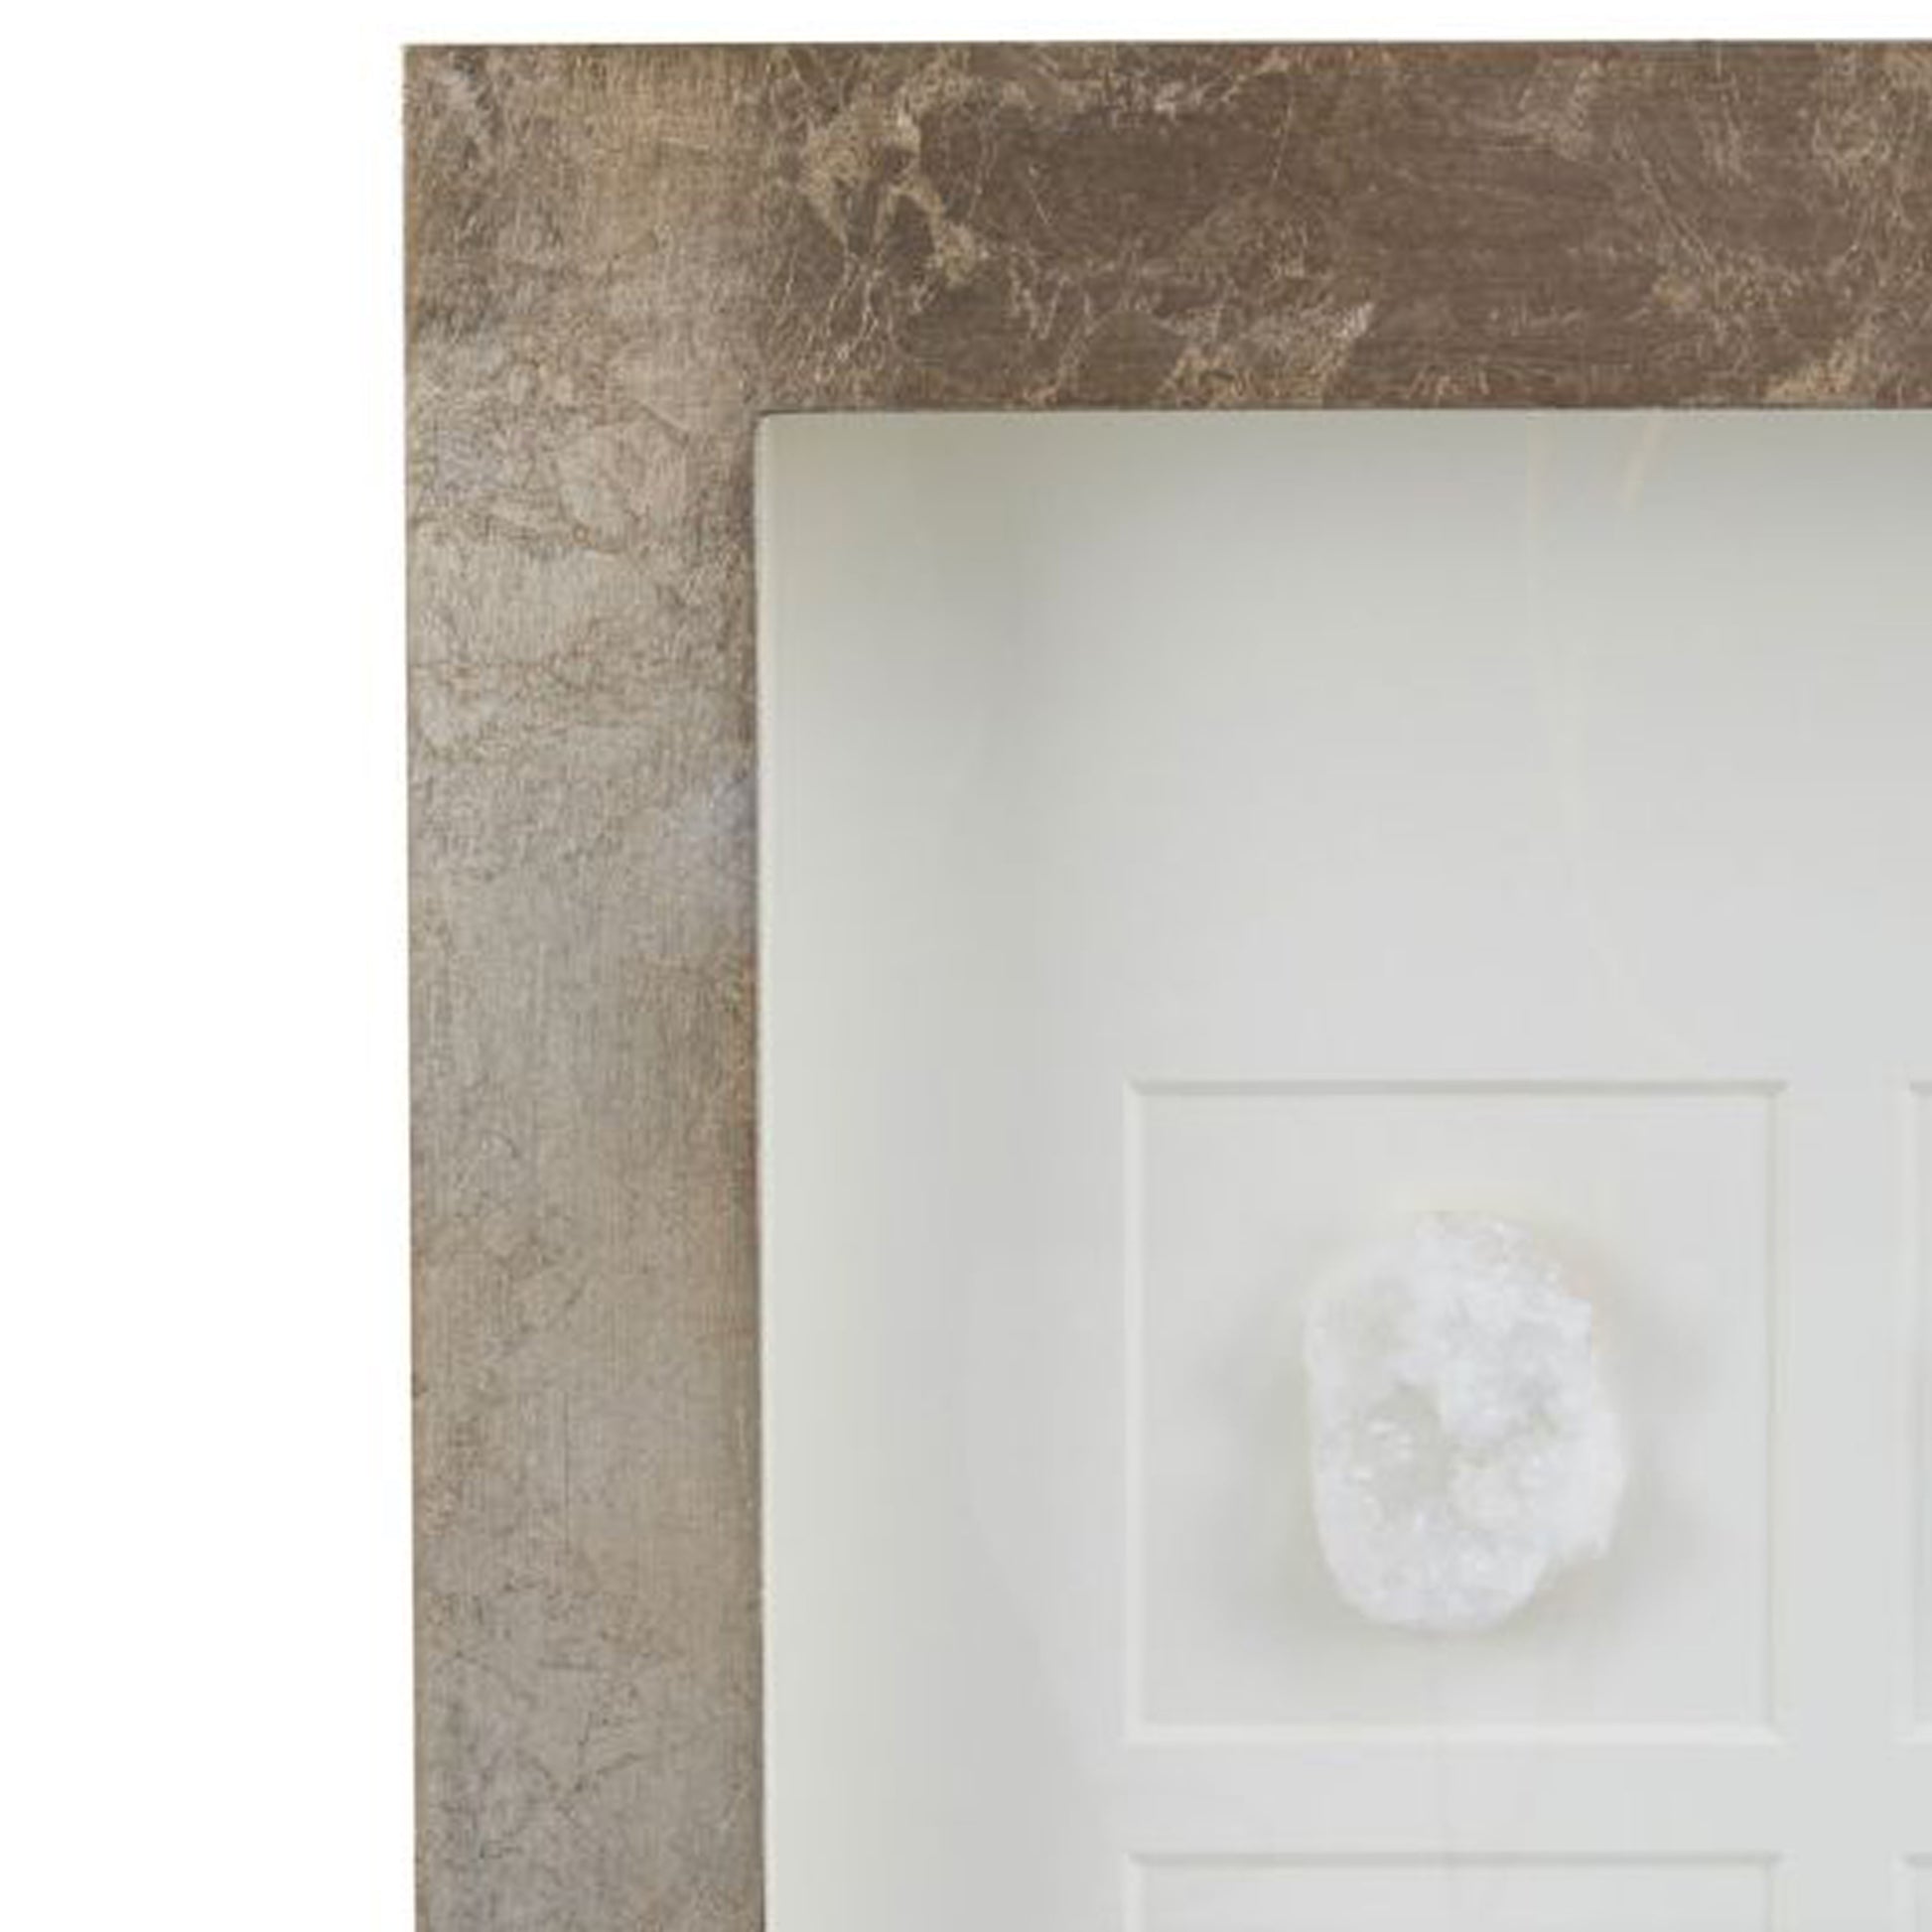 Natural Crystal Wall Art In Champagne Frame